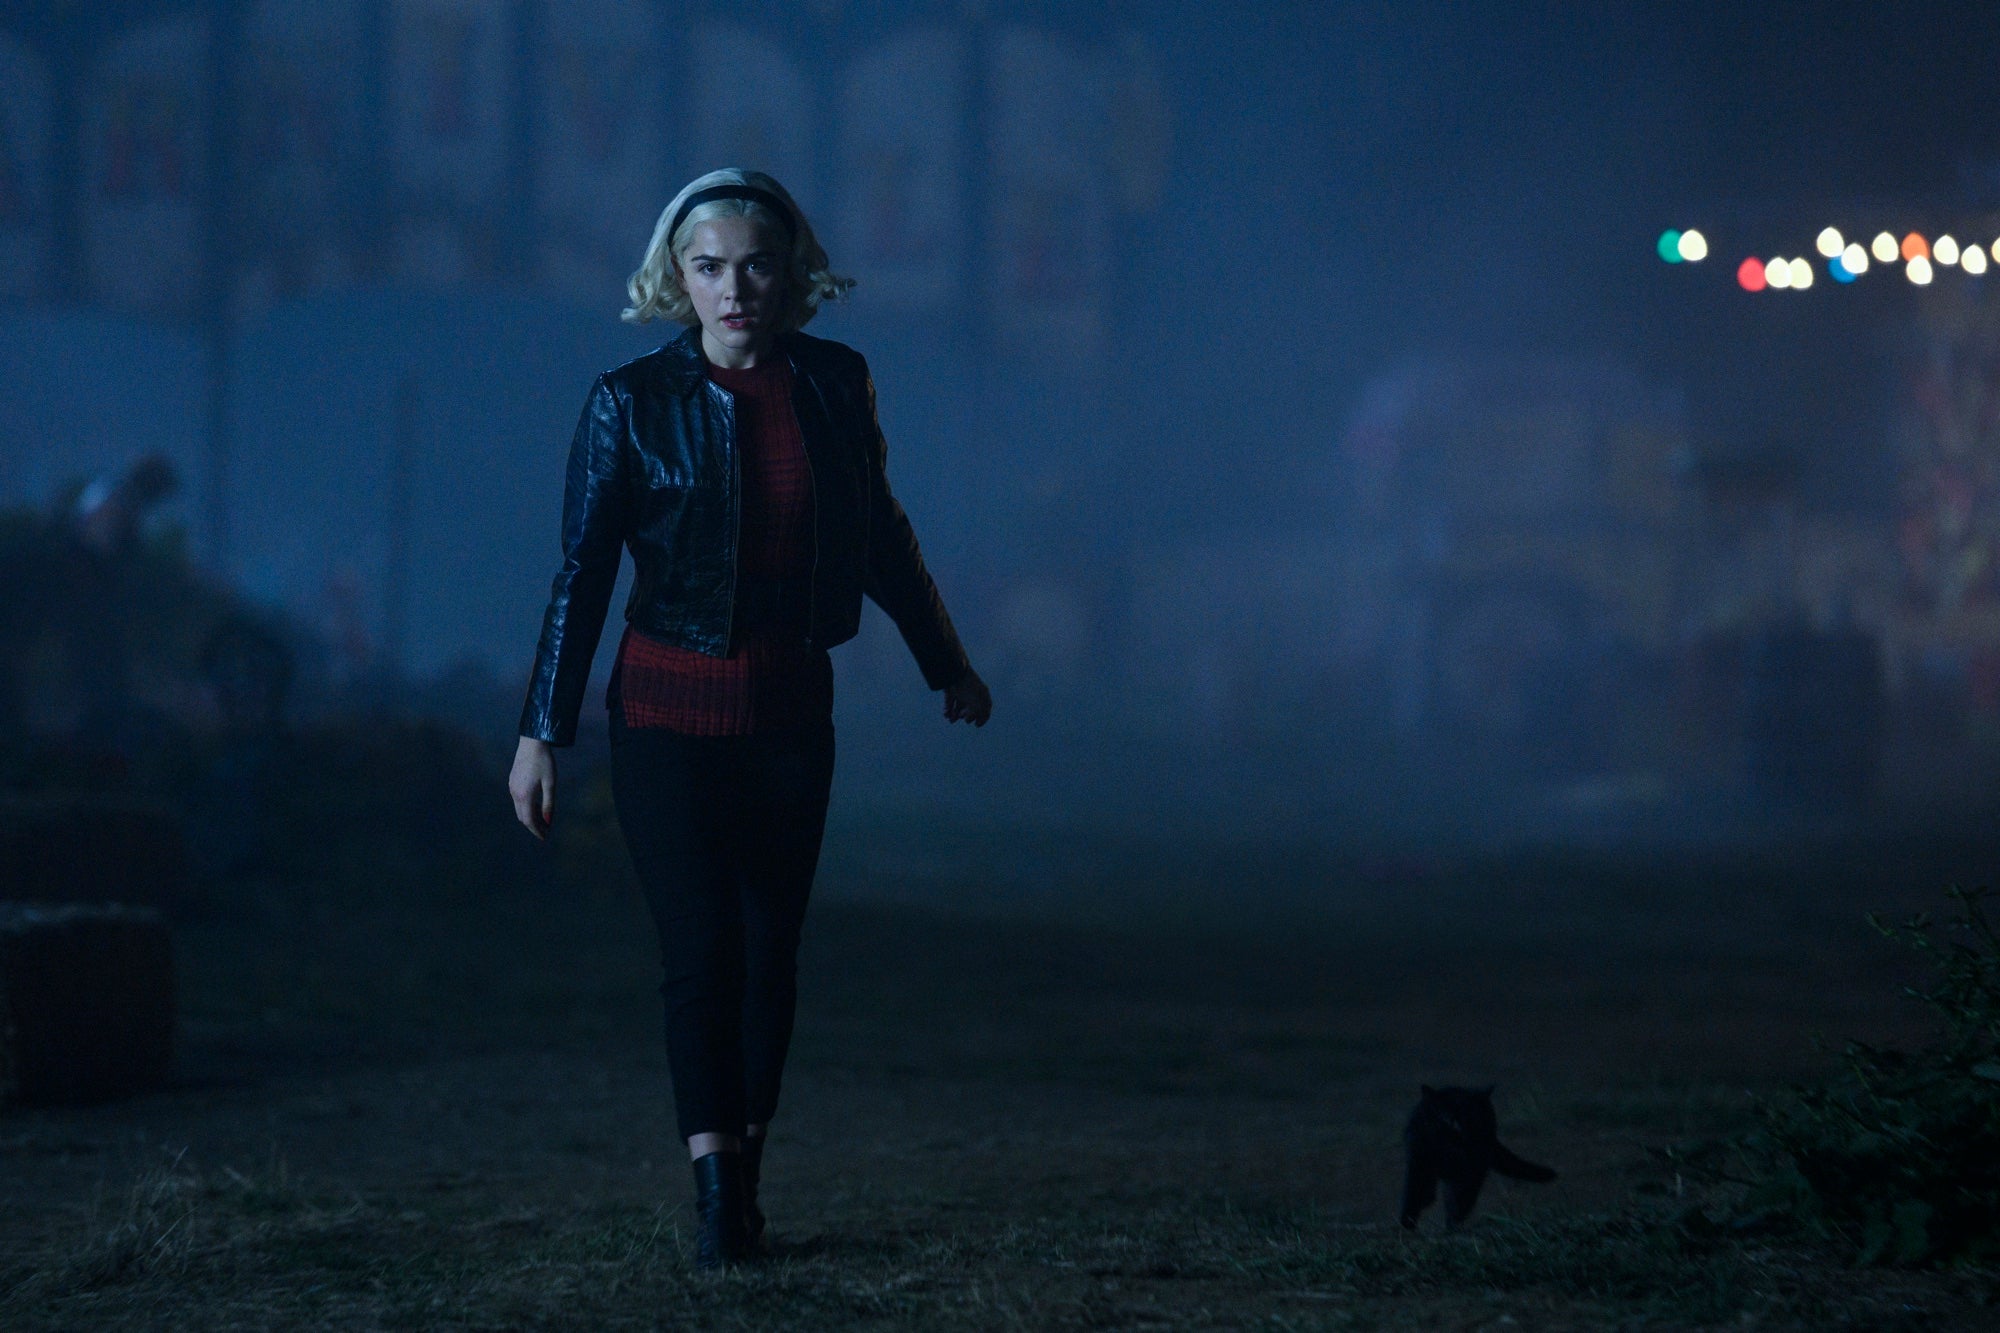 Image of Sabrina Spellman walking toward the camera in an episode of Chilling Adventures of Sabrina